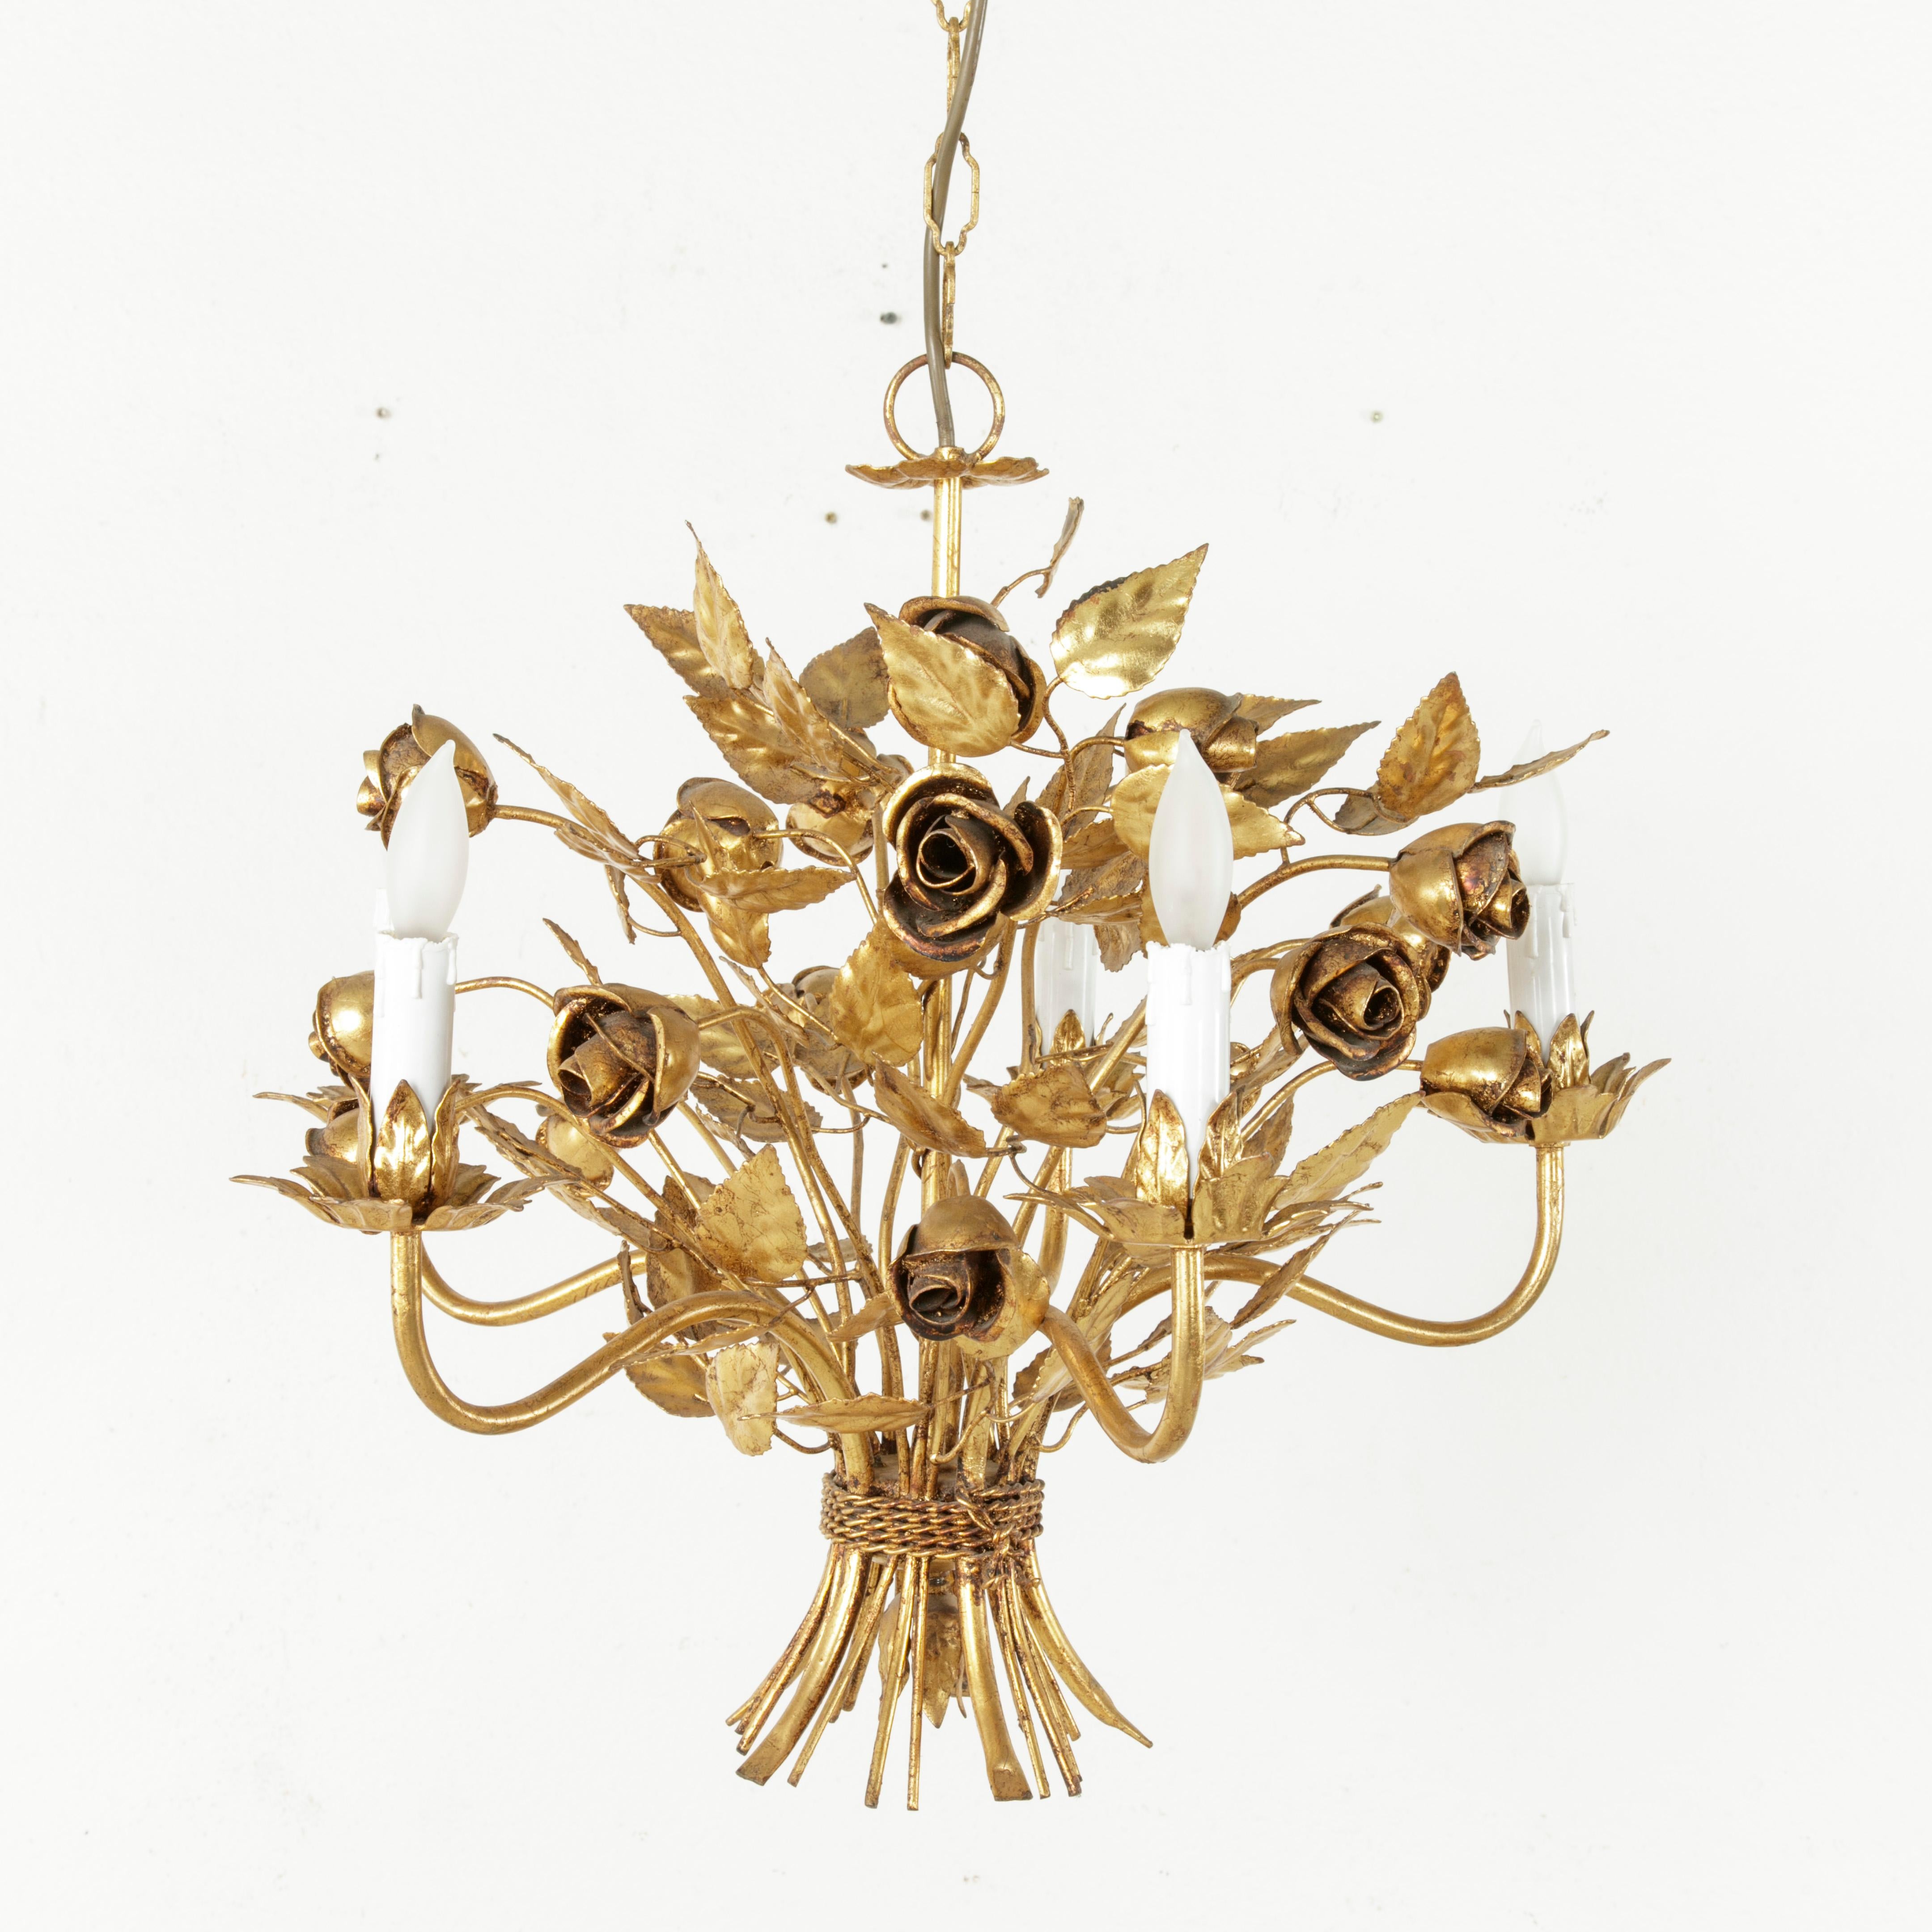 This midcentury Italian gilt metal chandelier with floral motif features a bouquet of roses and leaves bound with gilt metal twisted twine. Fitted with five lights and wired to American standards, it has its original gilt metal canopy. Its small